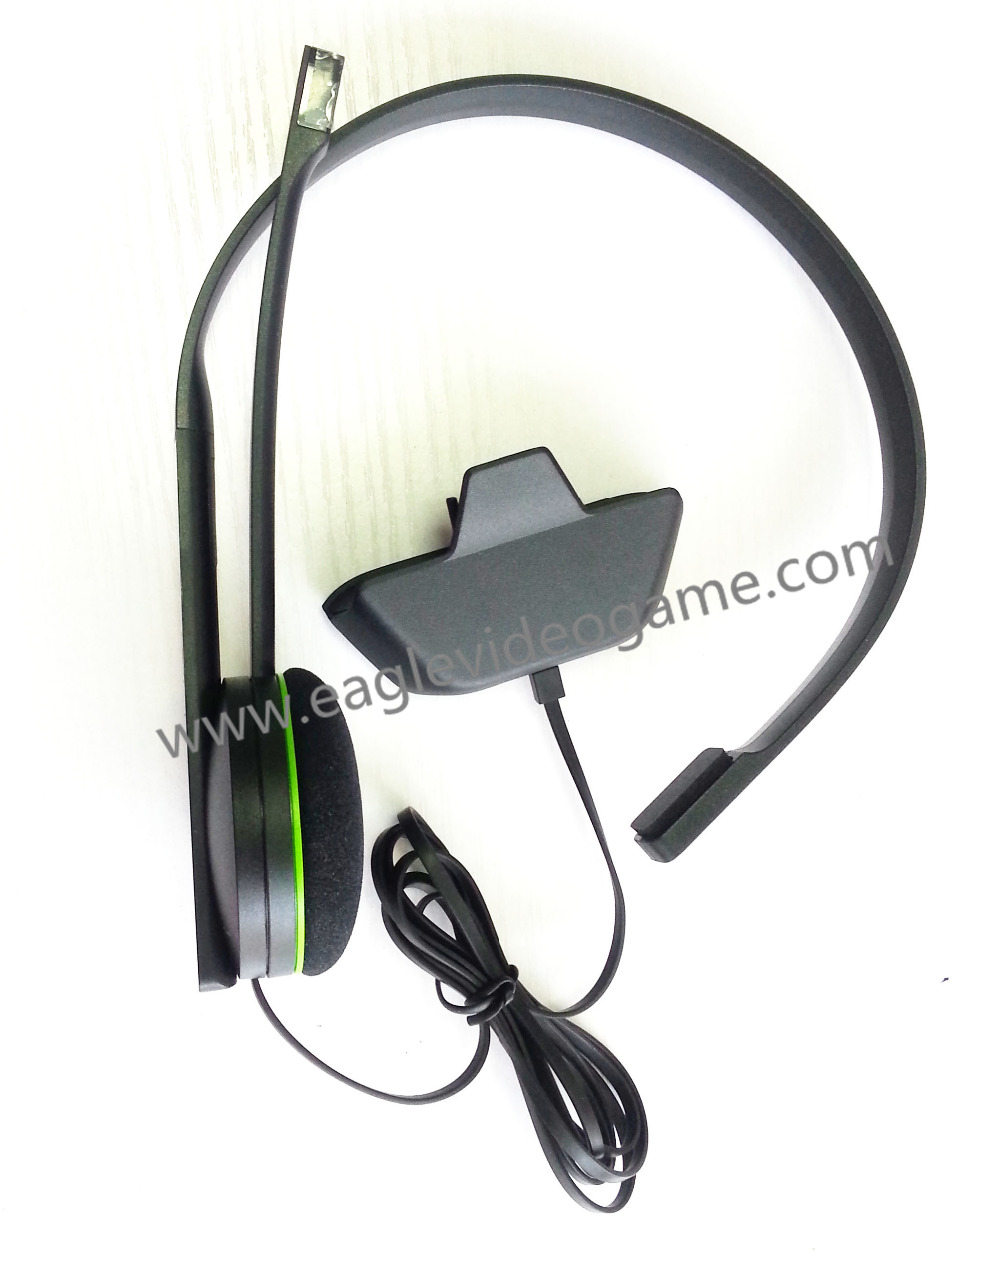 ps3 bluetooth headset instructions